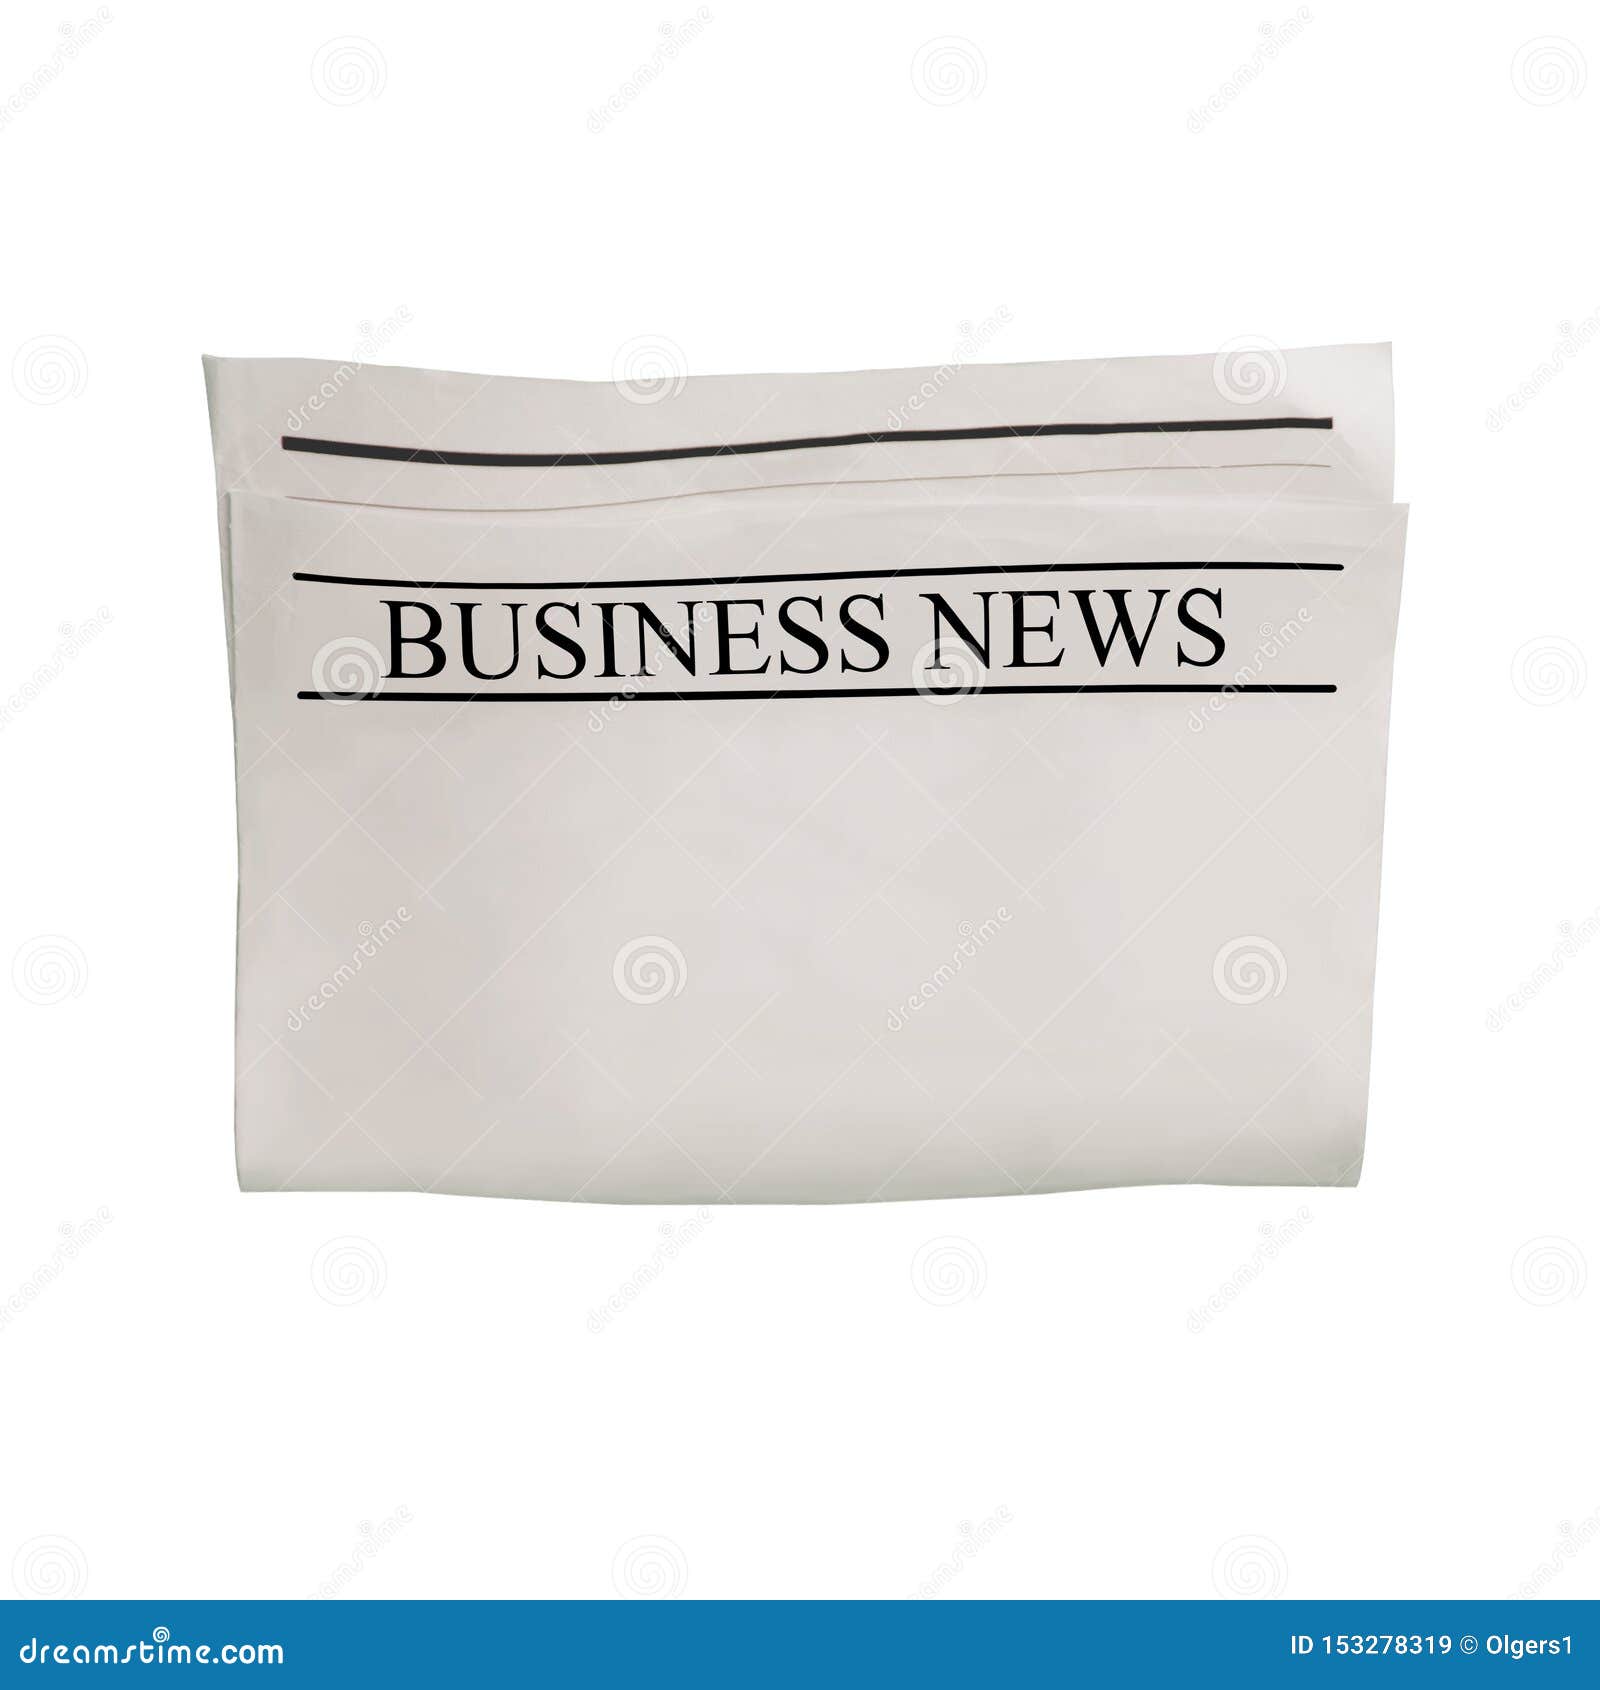 mockup of business news newspaper blank with empty space for news text, headline and images